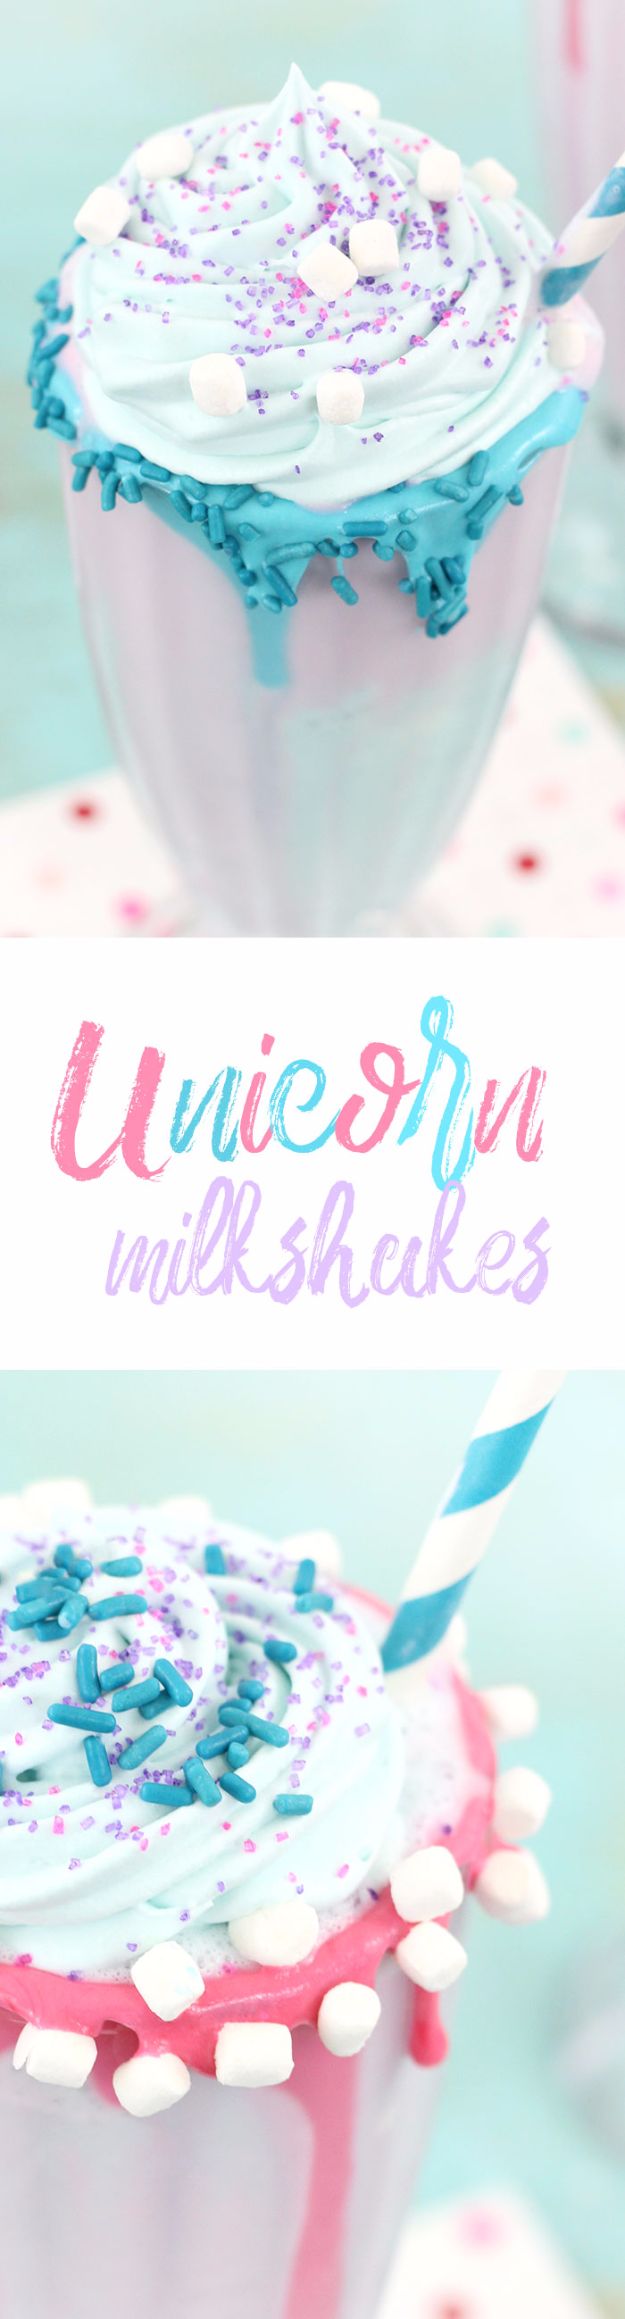 DIY Ideas With Unicorns - Unicorn Milkshakes - Cute and Easy DIY Projects for Unicorn Lovers - Wall and Home Decor Projects, Things To Make and Sell on Etsy - Quick Gifts to Make for Friends and Family - Homemade No Sew Projects and Pillows - Fun Jewelry, Desk Decor Cool Clothes and Accessories